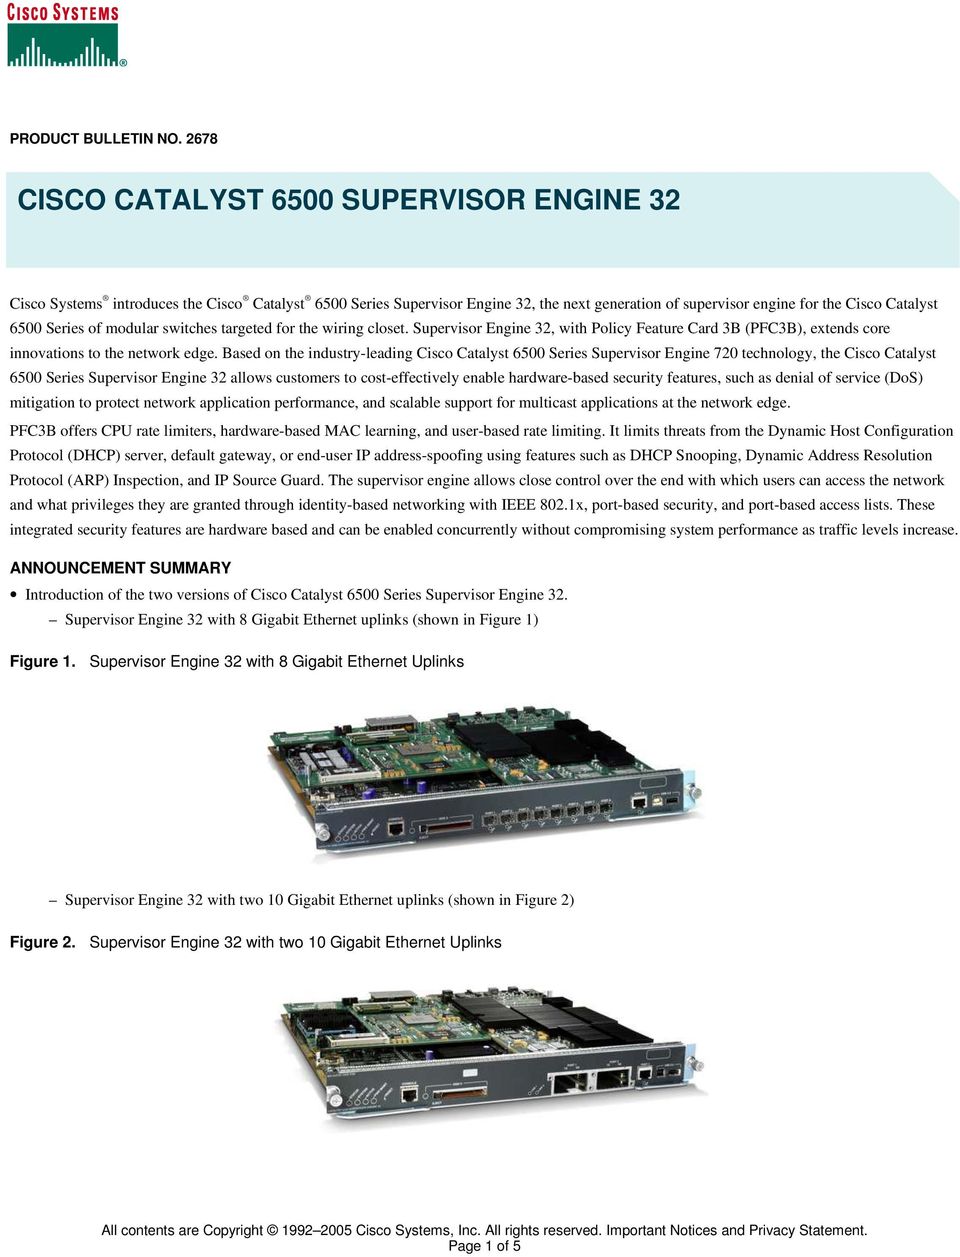 of modular switches targeted for the wiring closet. Supervisor Engine 32, with Policy Feature Card 3B (PFC3B), extends core innovations to the network edge.